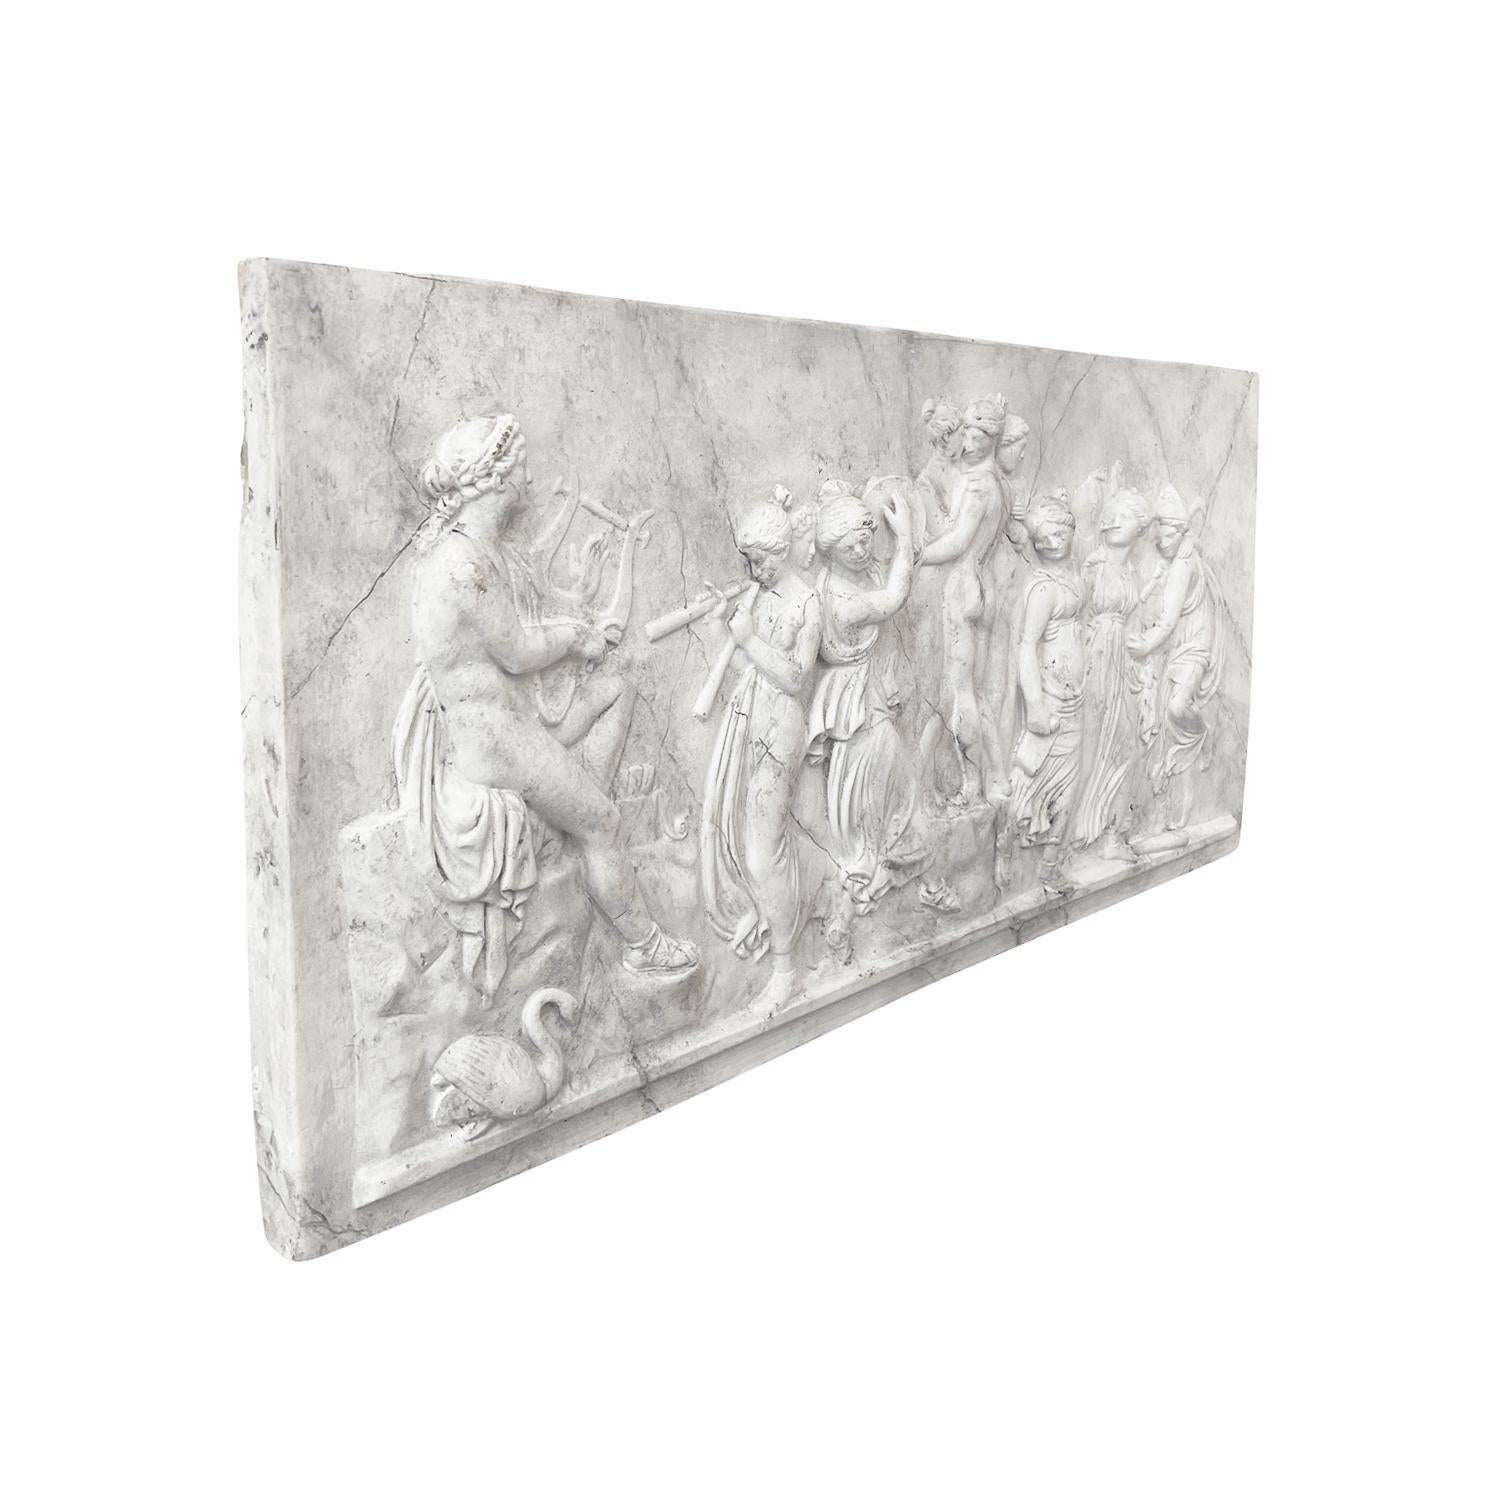 An early 20th Century, vintage French Art Deco wall, bas relief of the Greek God Apollo and his muses made of hand crafted Plaster, in good condition. Not recommended for exterior use. Wear consistent with age and use. Circa 1920 - 1930, Paris,